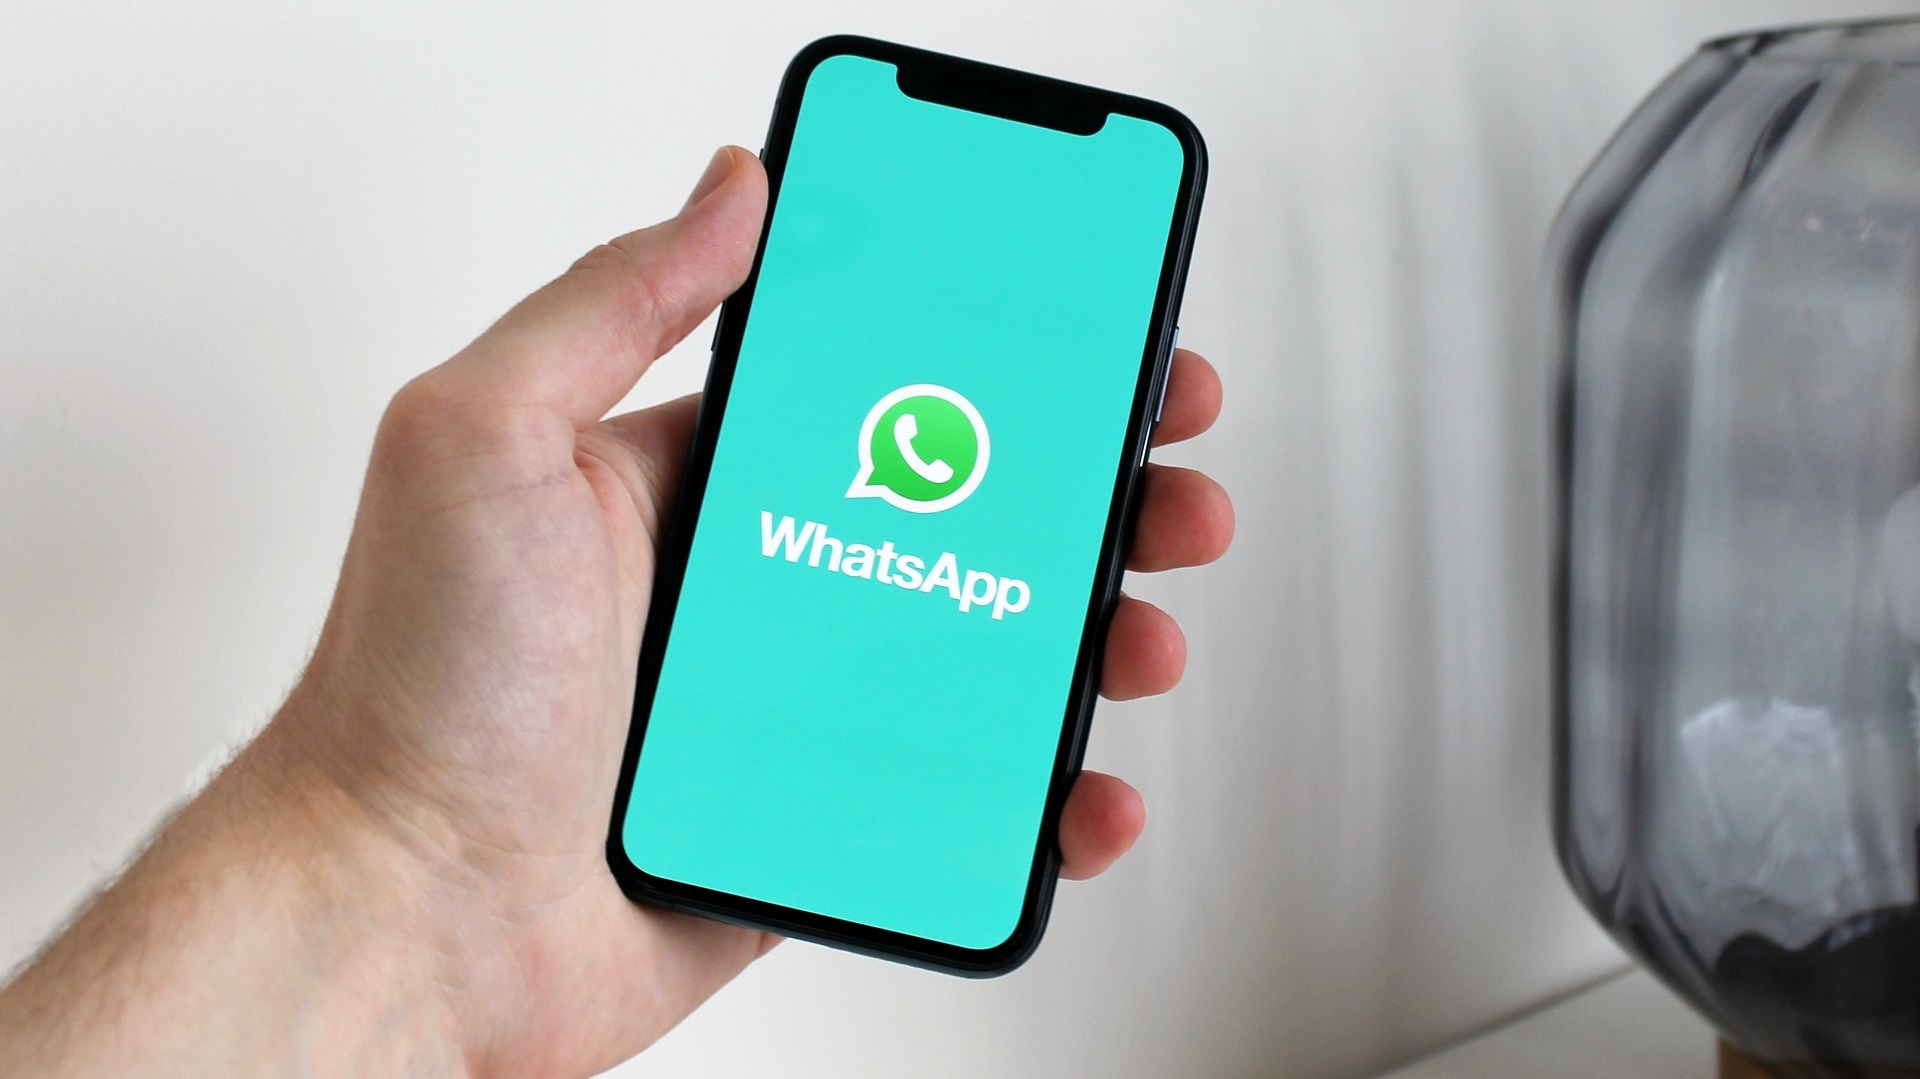 Learn How to Reduce the Size of a Video to Send via WhatsApp